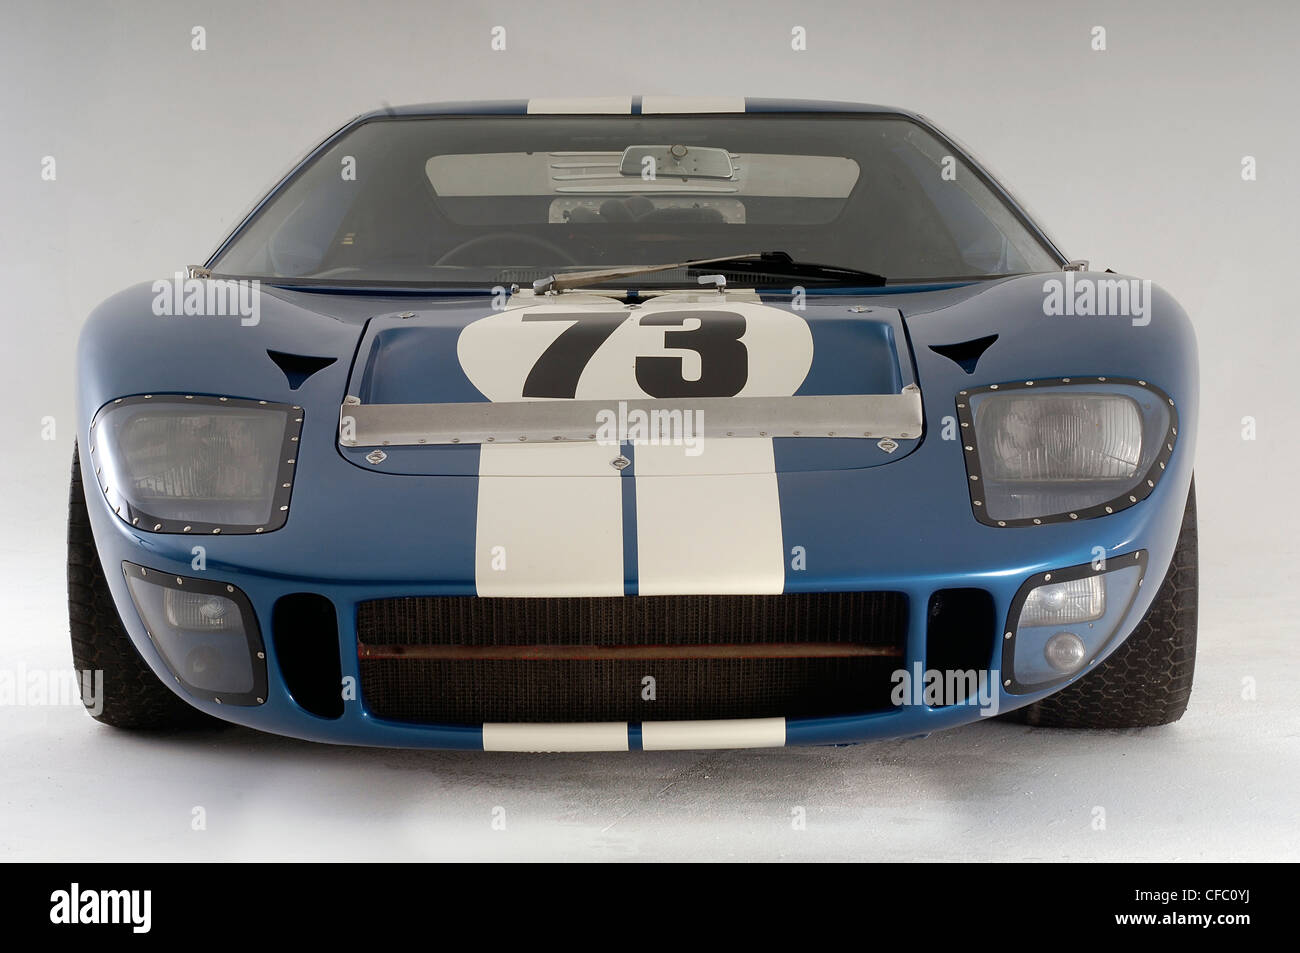 1965 Ford GT40 Daytona Prototype Banque D'Images